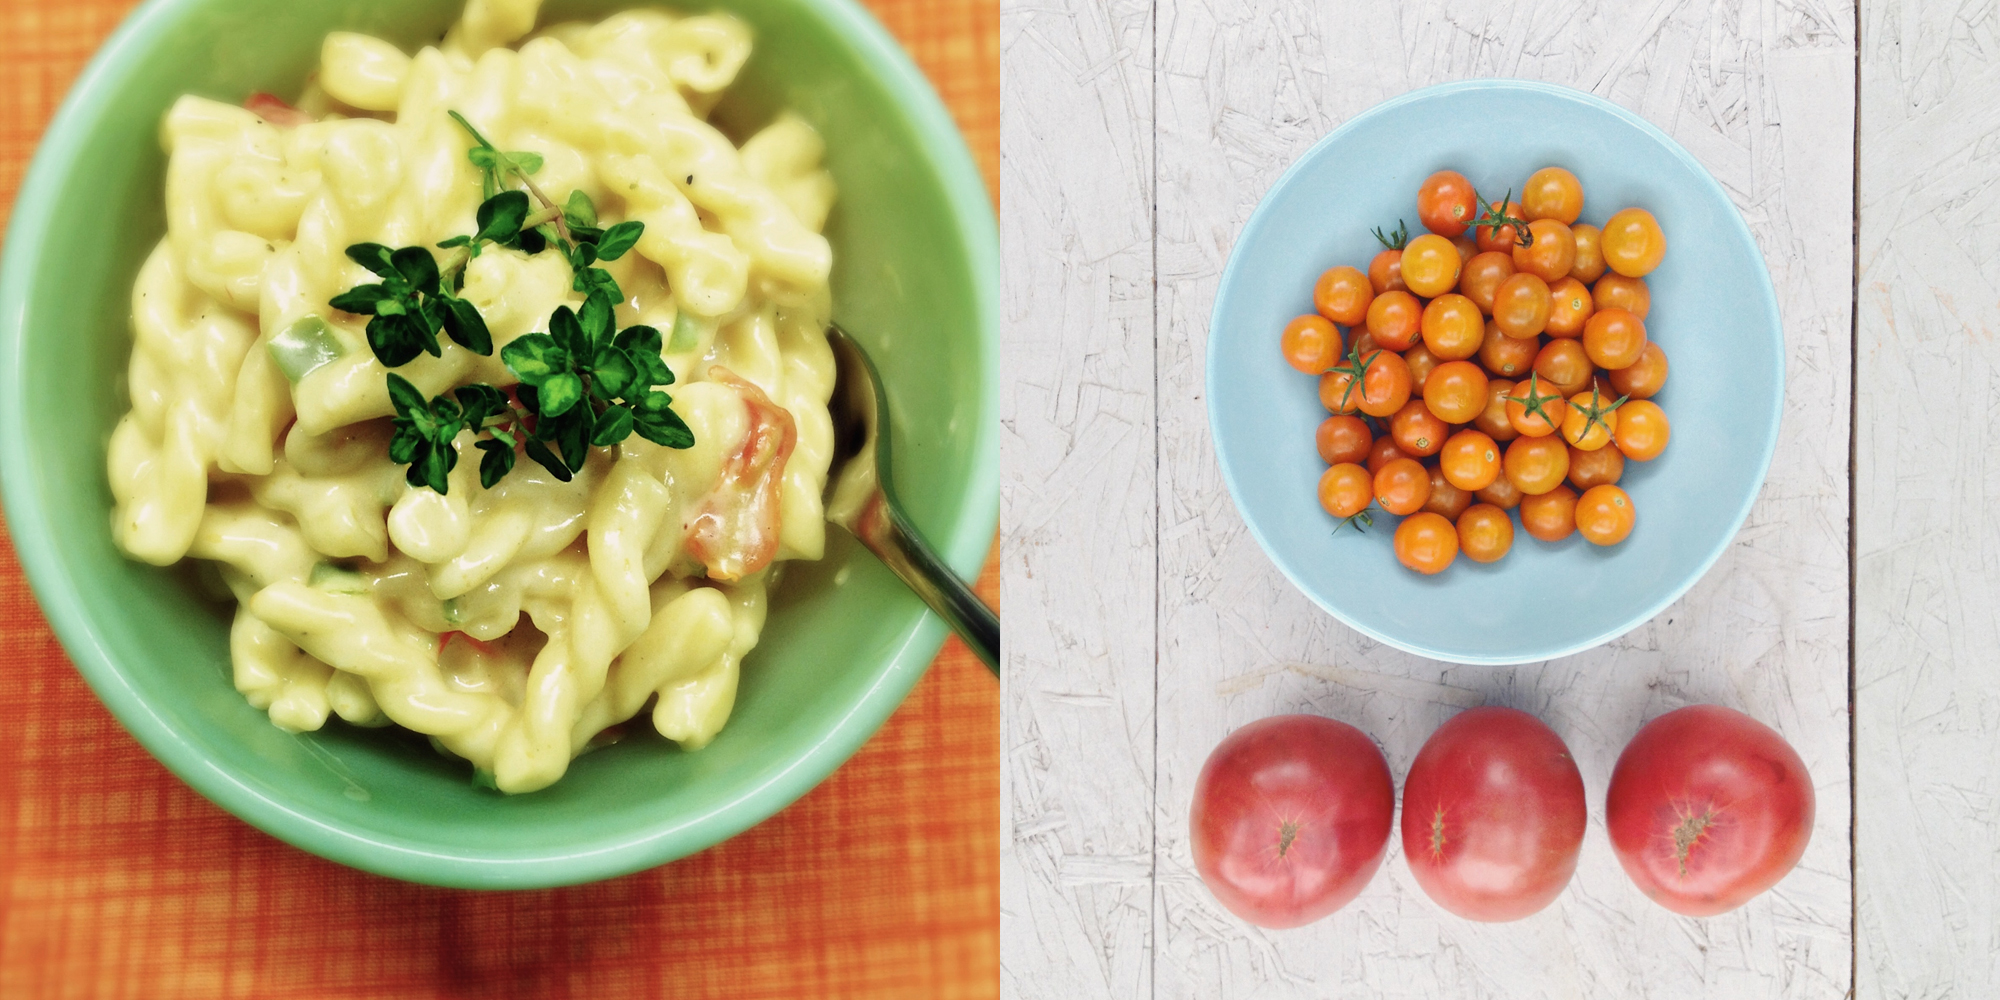 tomatoes and mac cheese diptych.jpg